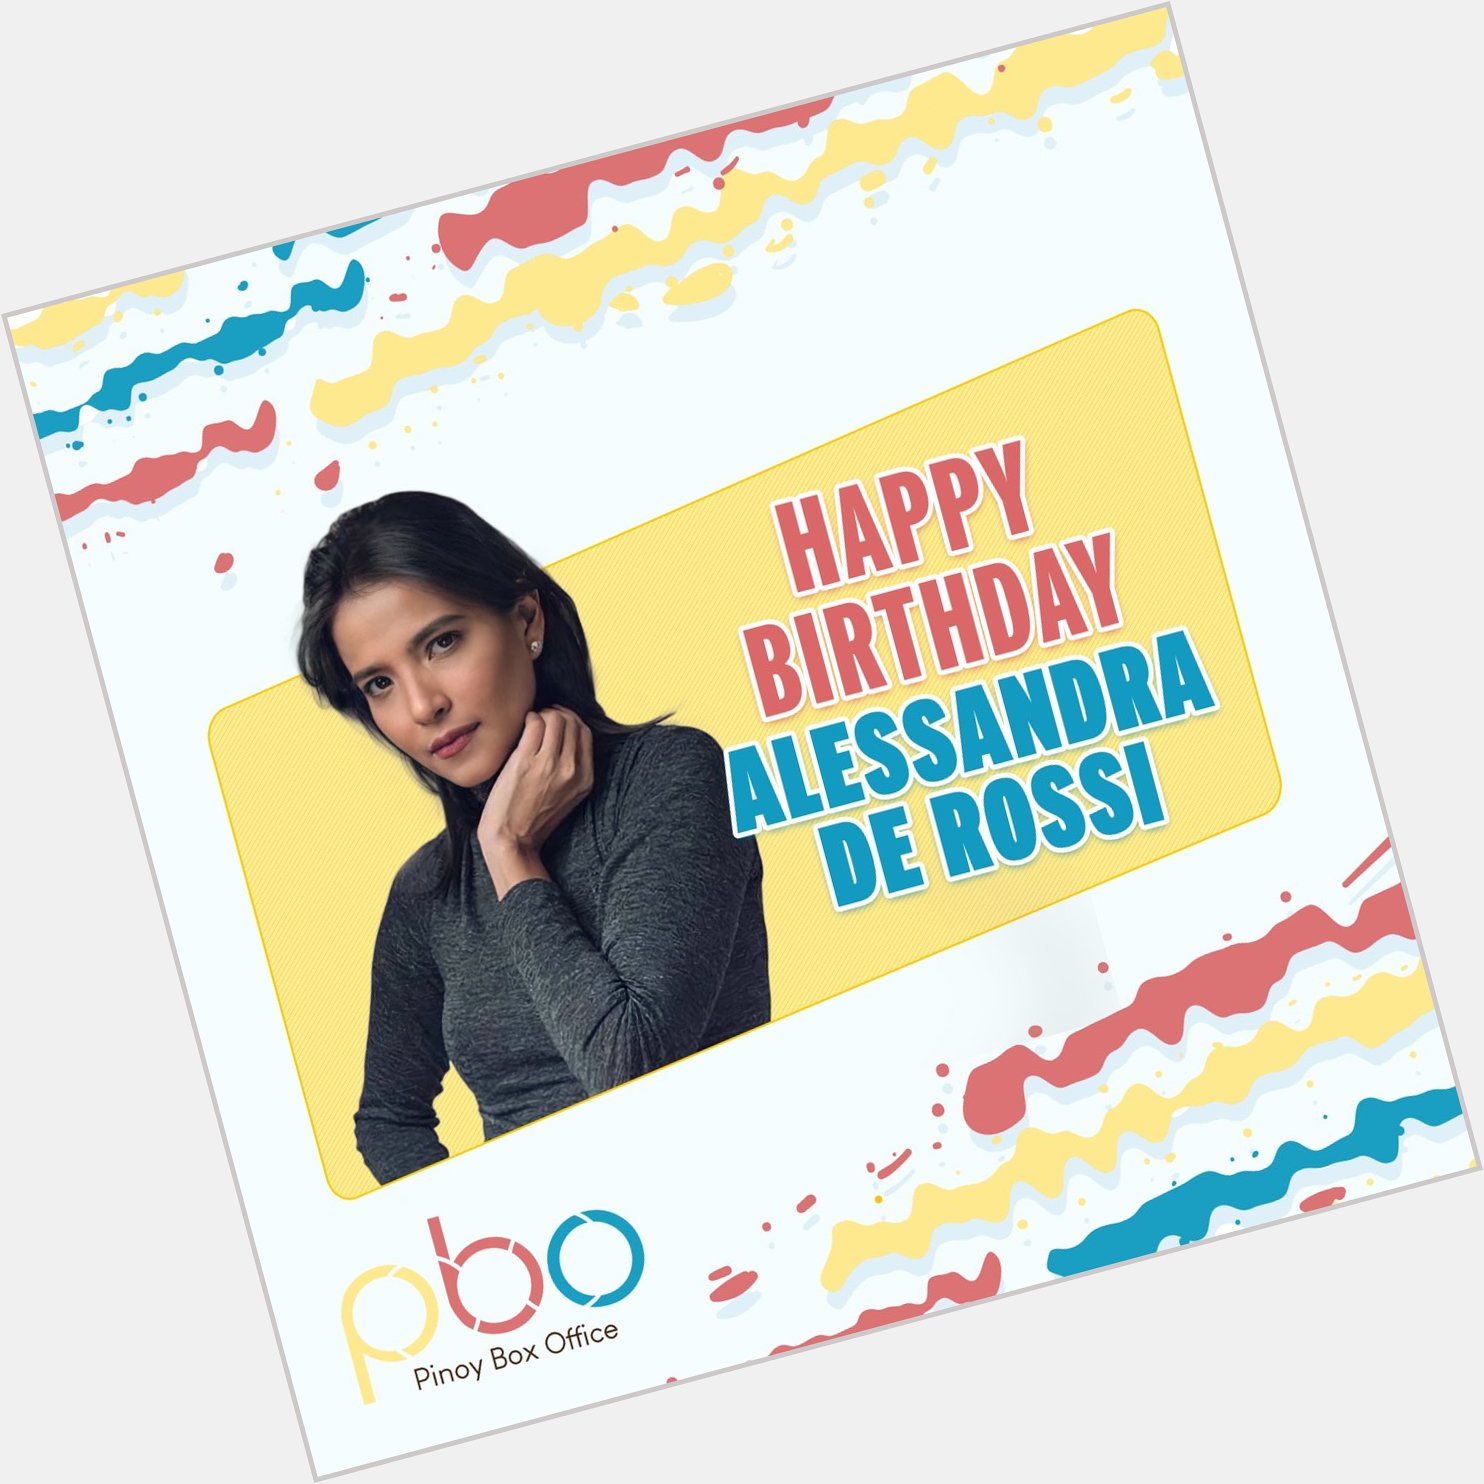 Happy birthday, Alessandra De Rossi! Continue shining like a star! Have lots of fun on your special day! 